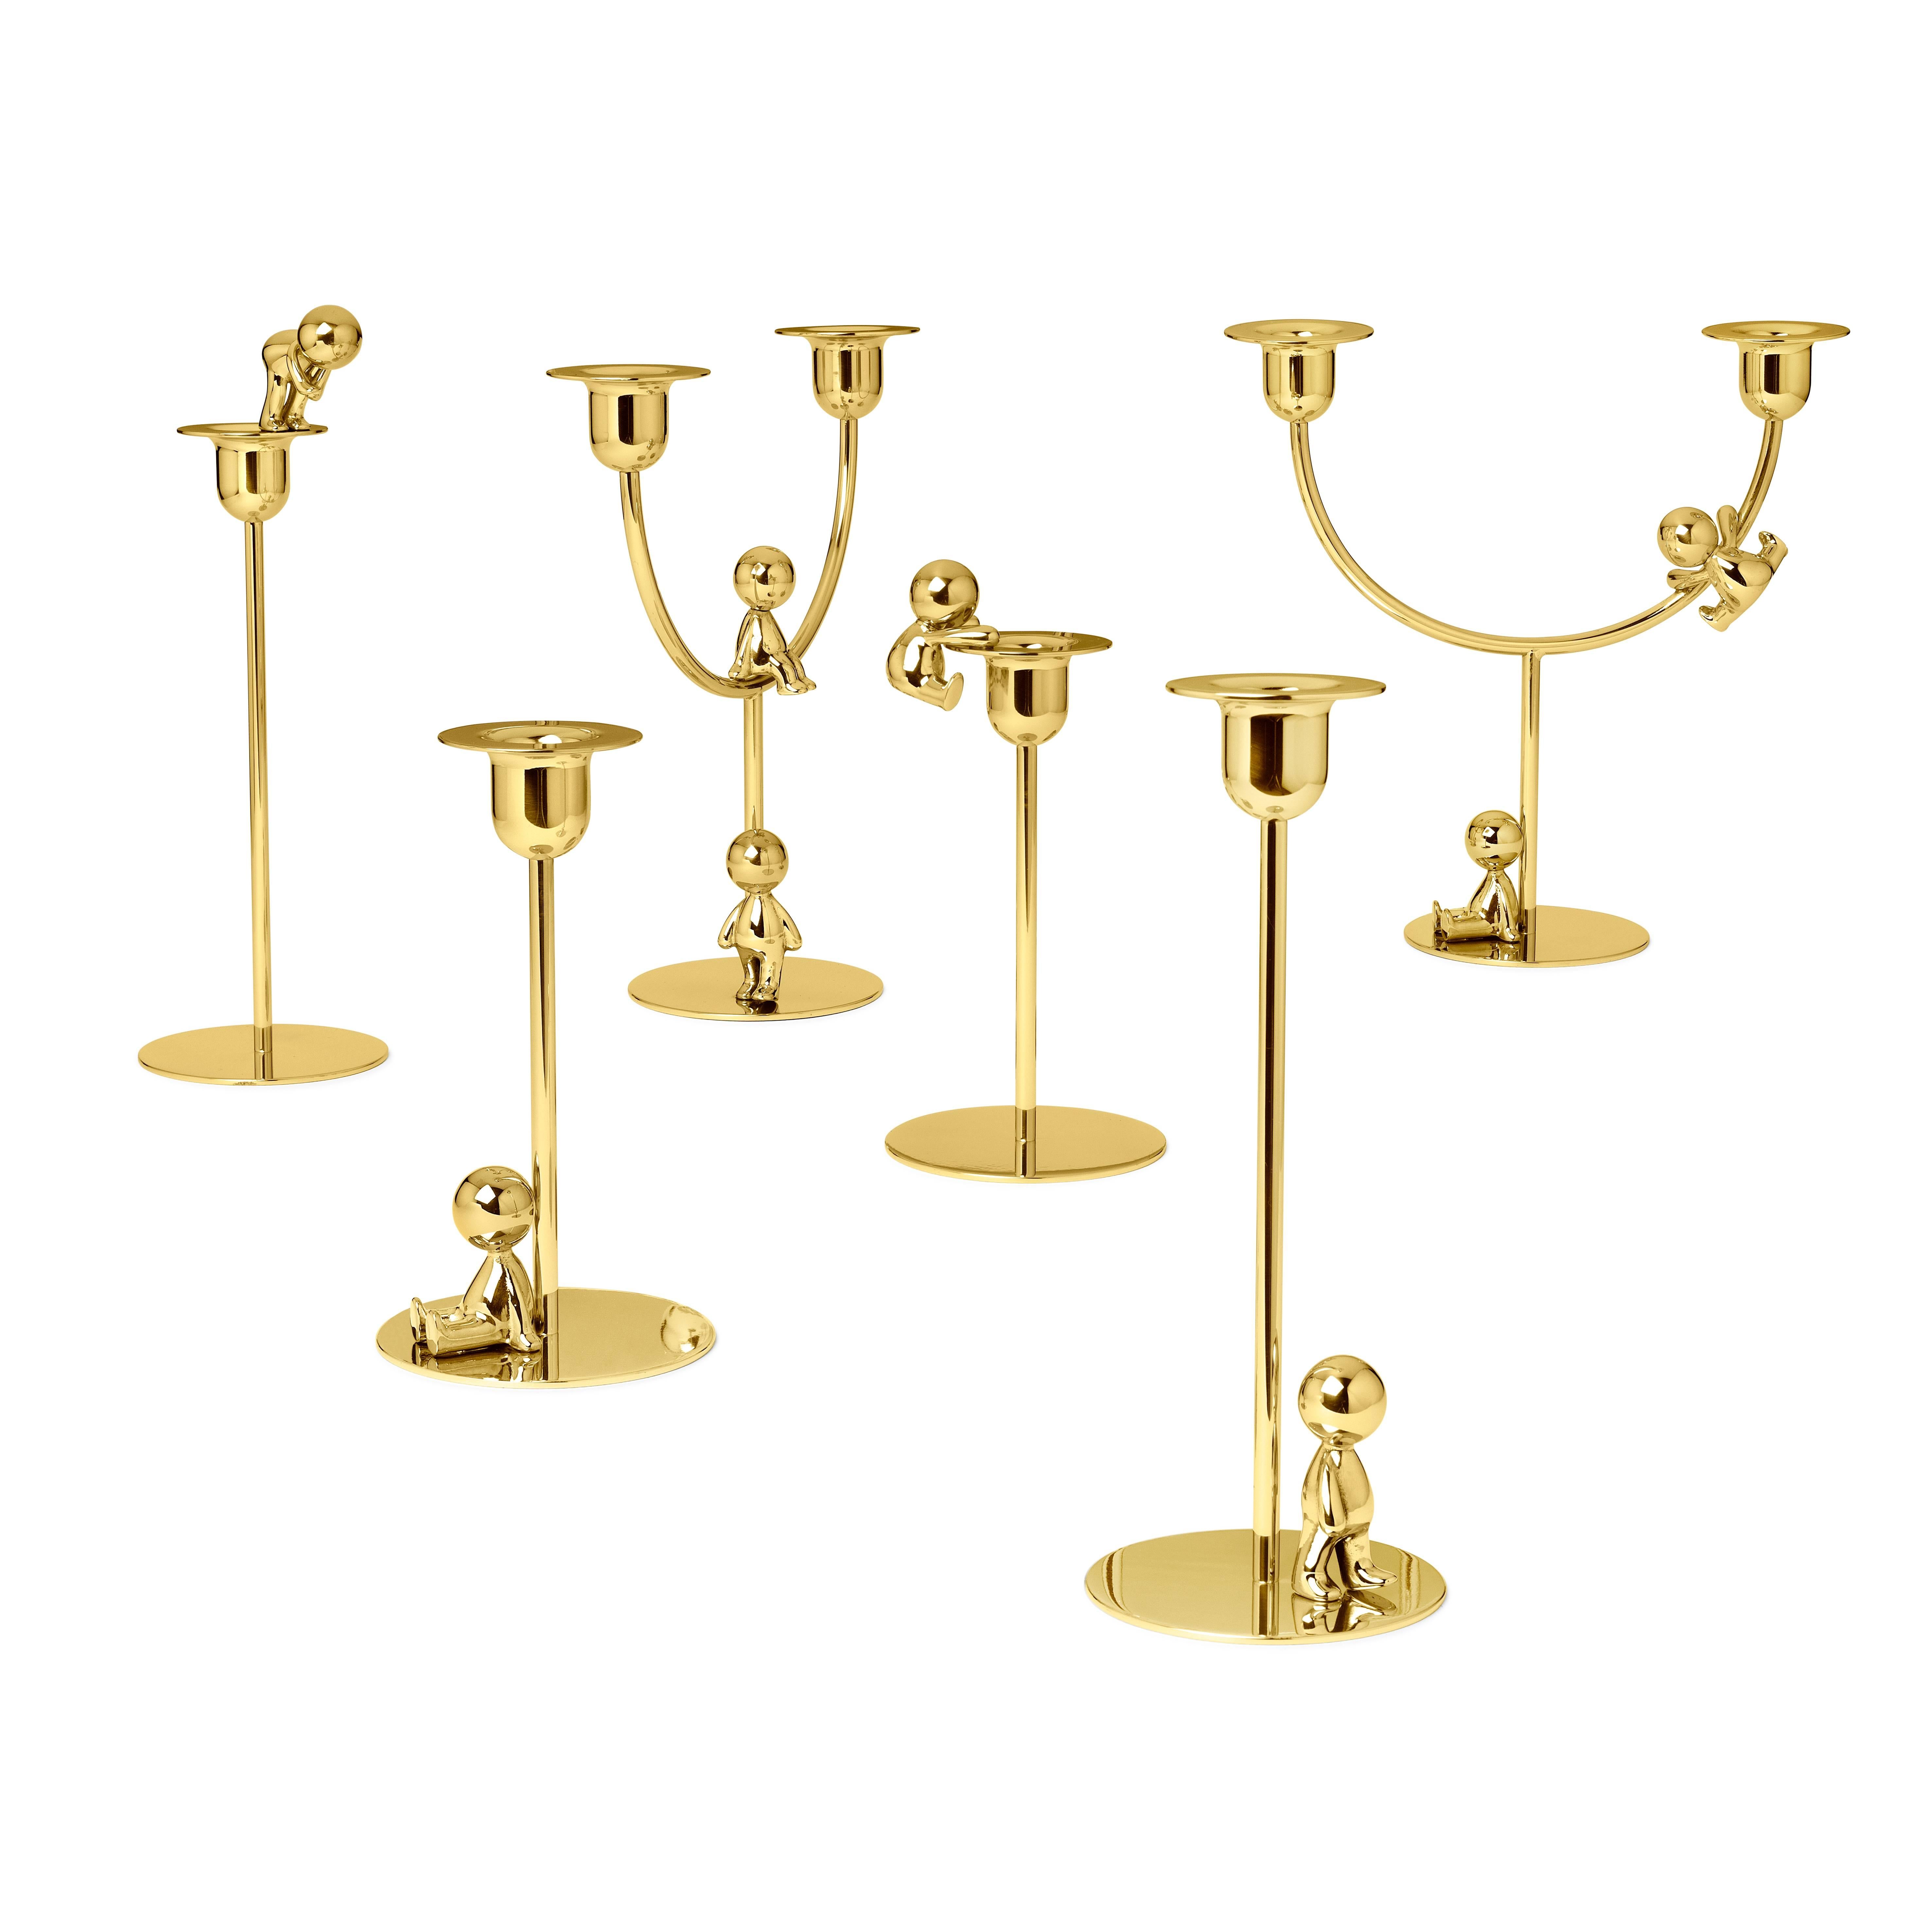 Marked by a timeless minimalist aesthetic, this sculptural double candlestick is a modern take on a traditional piece of home decor. Made of polished brass, the piece features two rounded bobeches with wide rims, two long, curved arms, and a flat